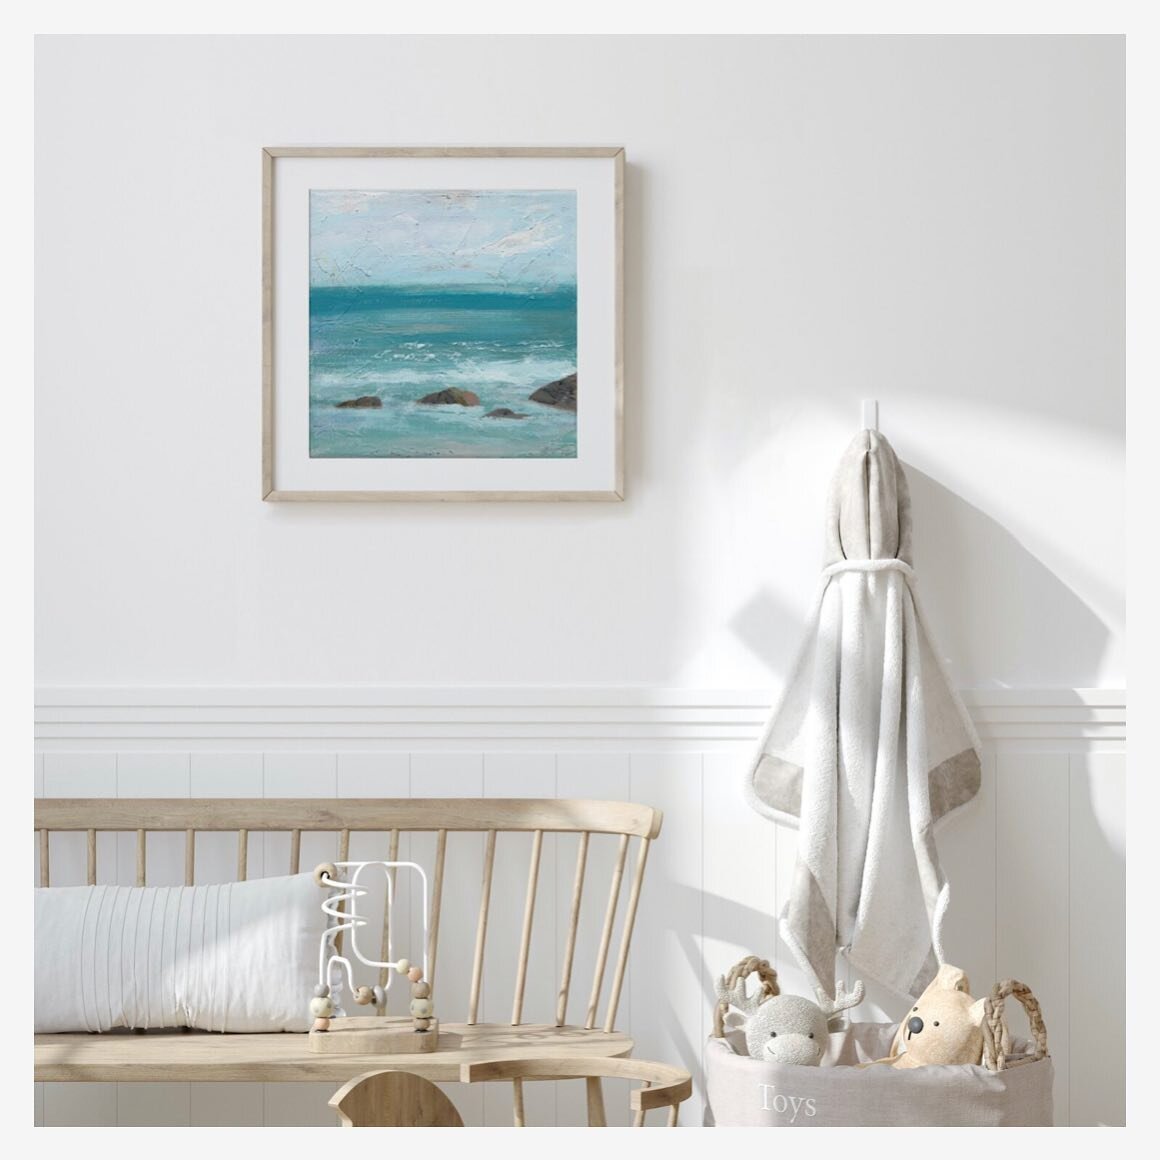 With a clinical and calm room this Fine Art Giclee Print by my partners @the_logical_choice_group takes centre stage. The impact of art really does take your breath away. If it captures you in the moment Martyn feels he has done his job #art #prints 